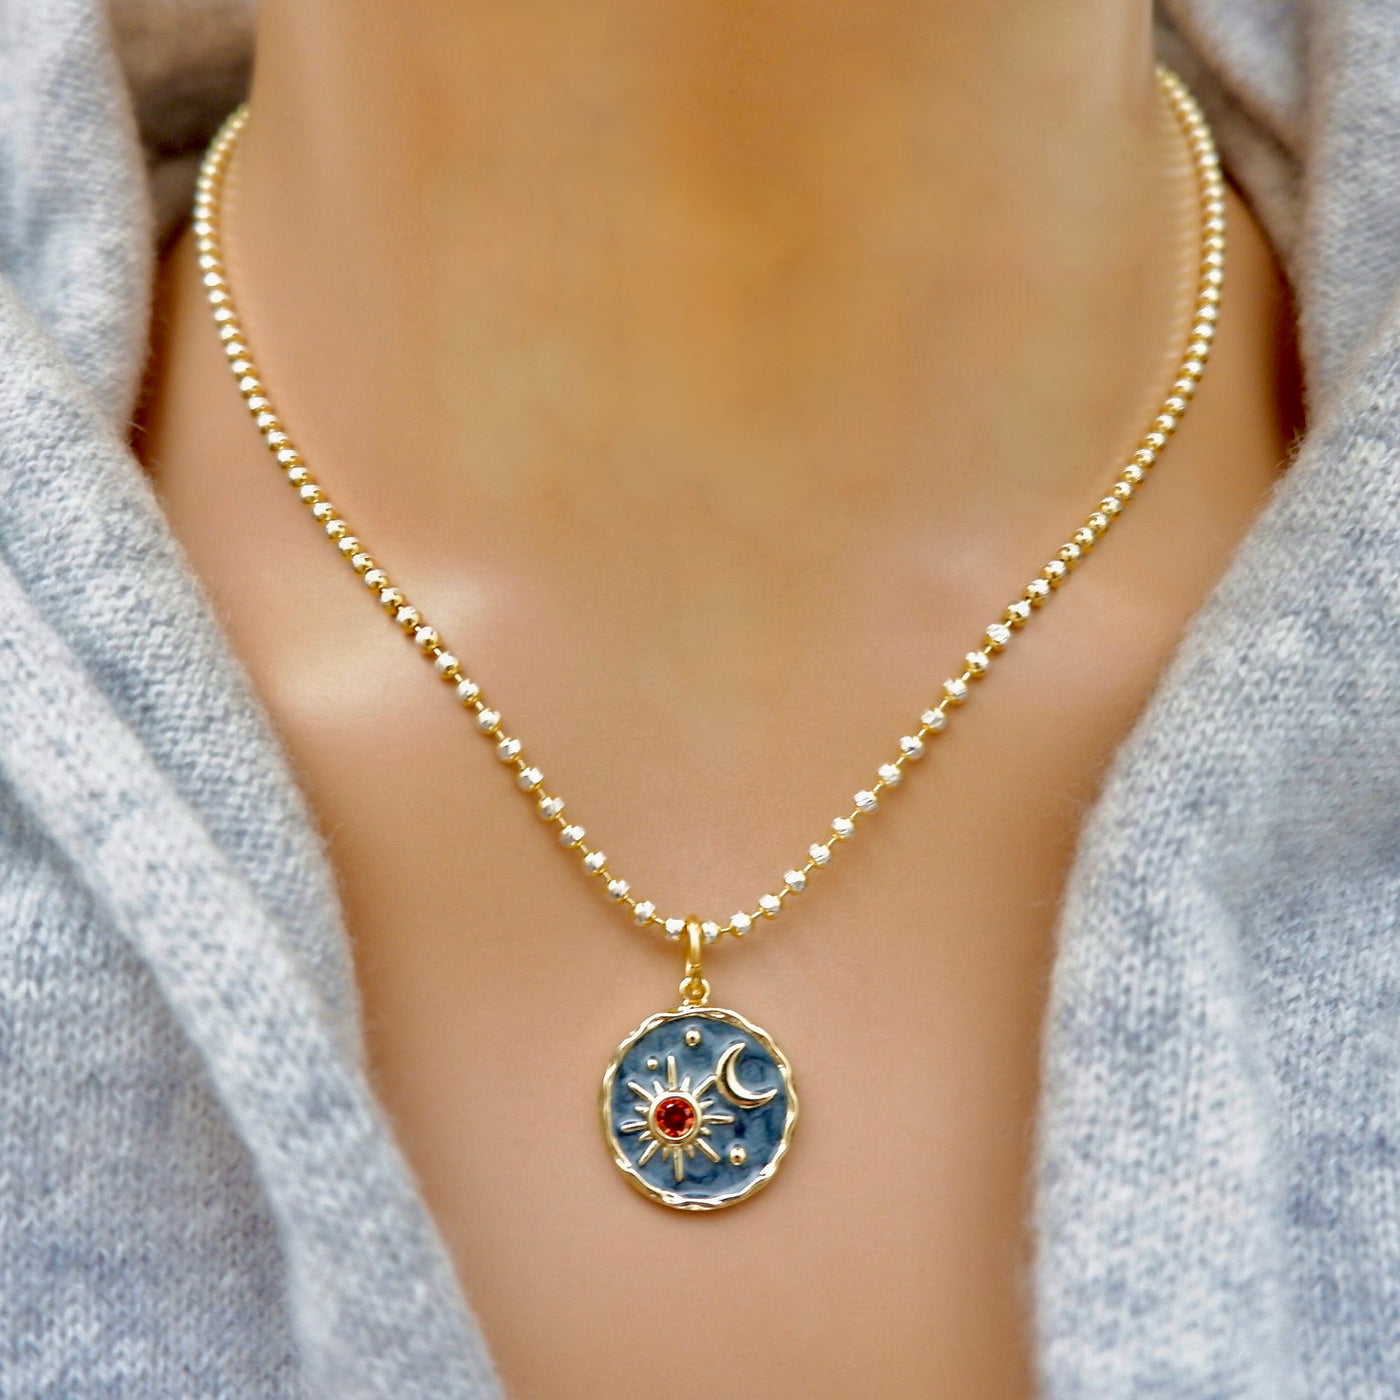 my sun and moon necklace